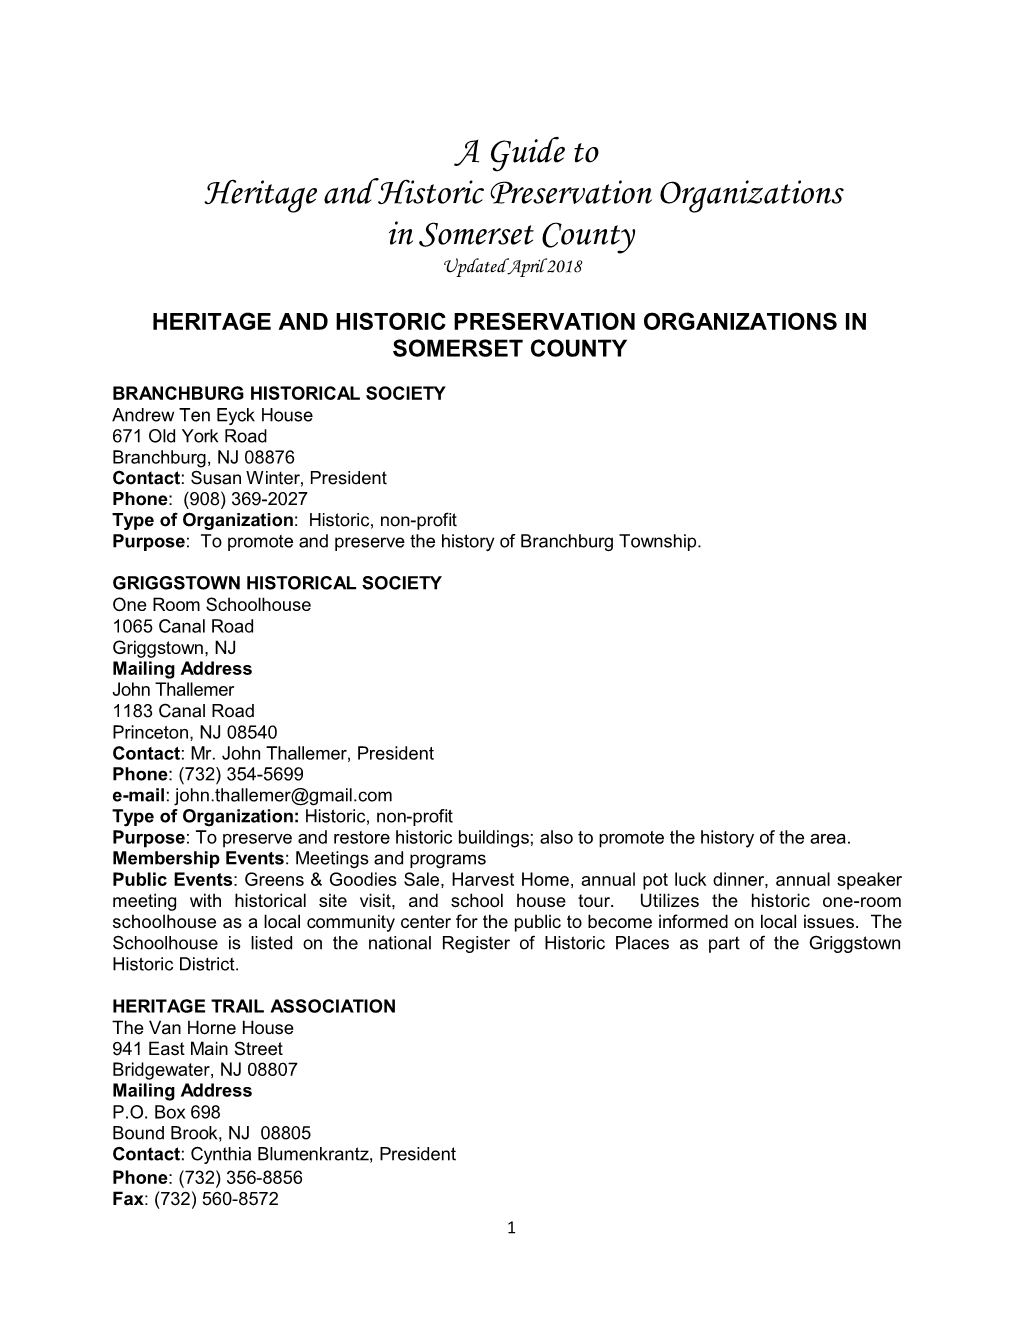 A Guide to Heritage and Historic Preservation Organizations in Somerset County Updated April 2018